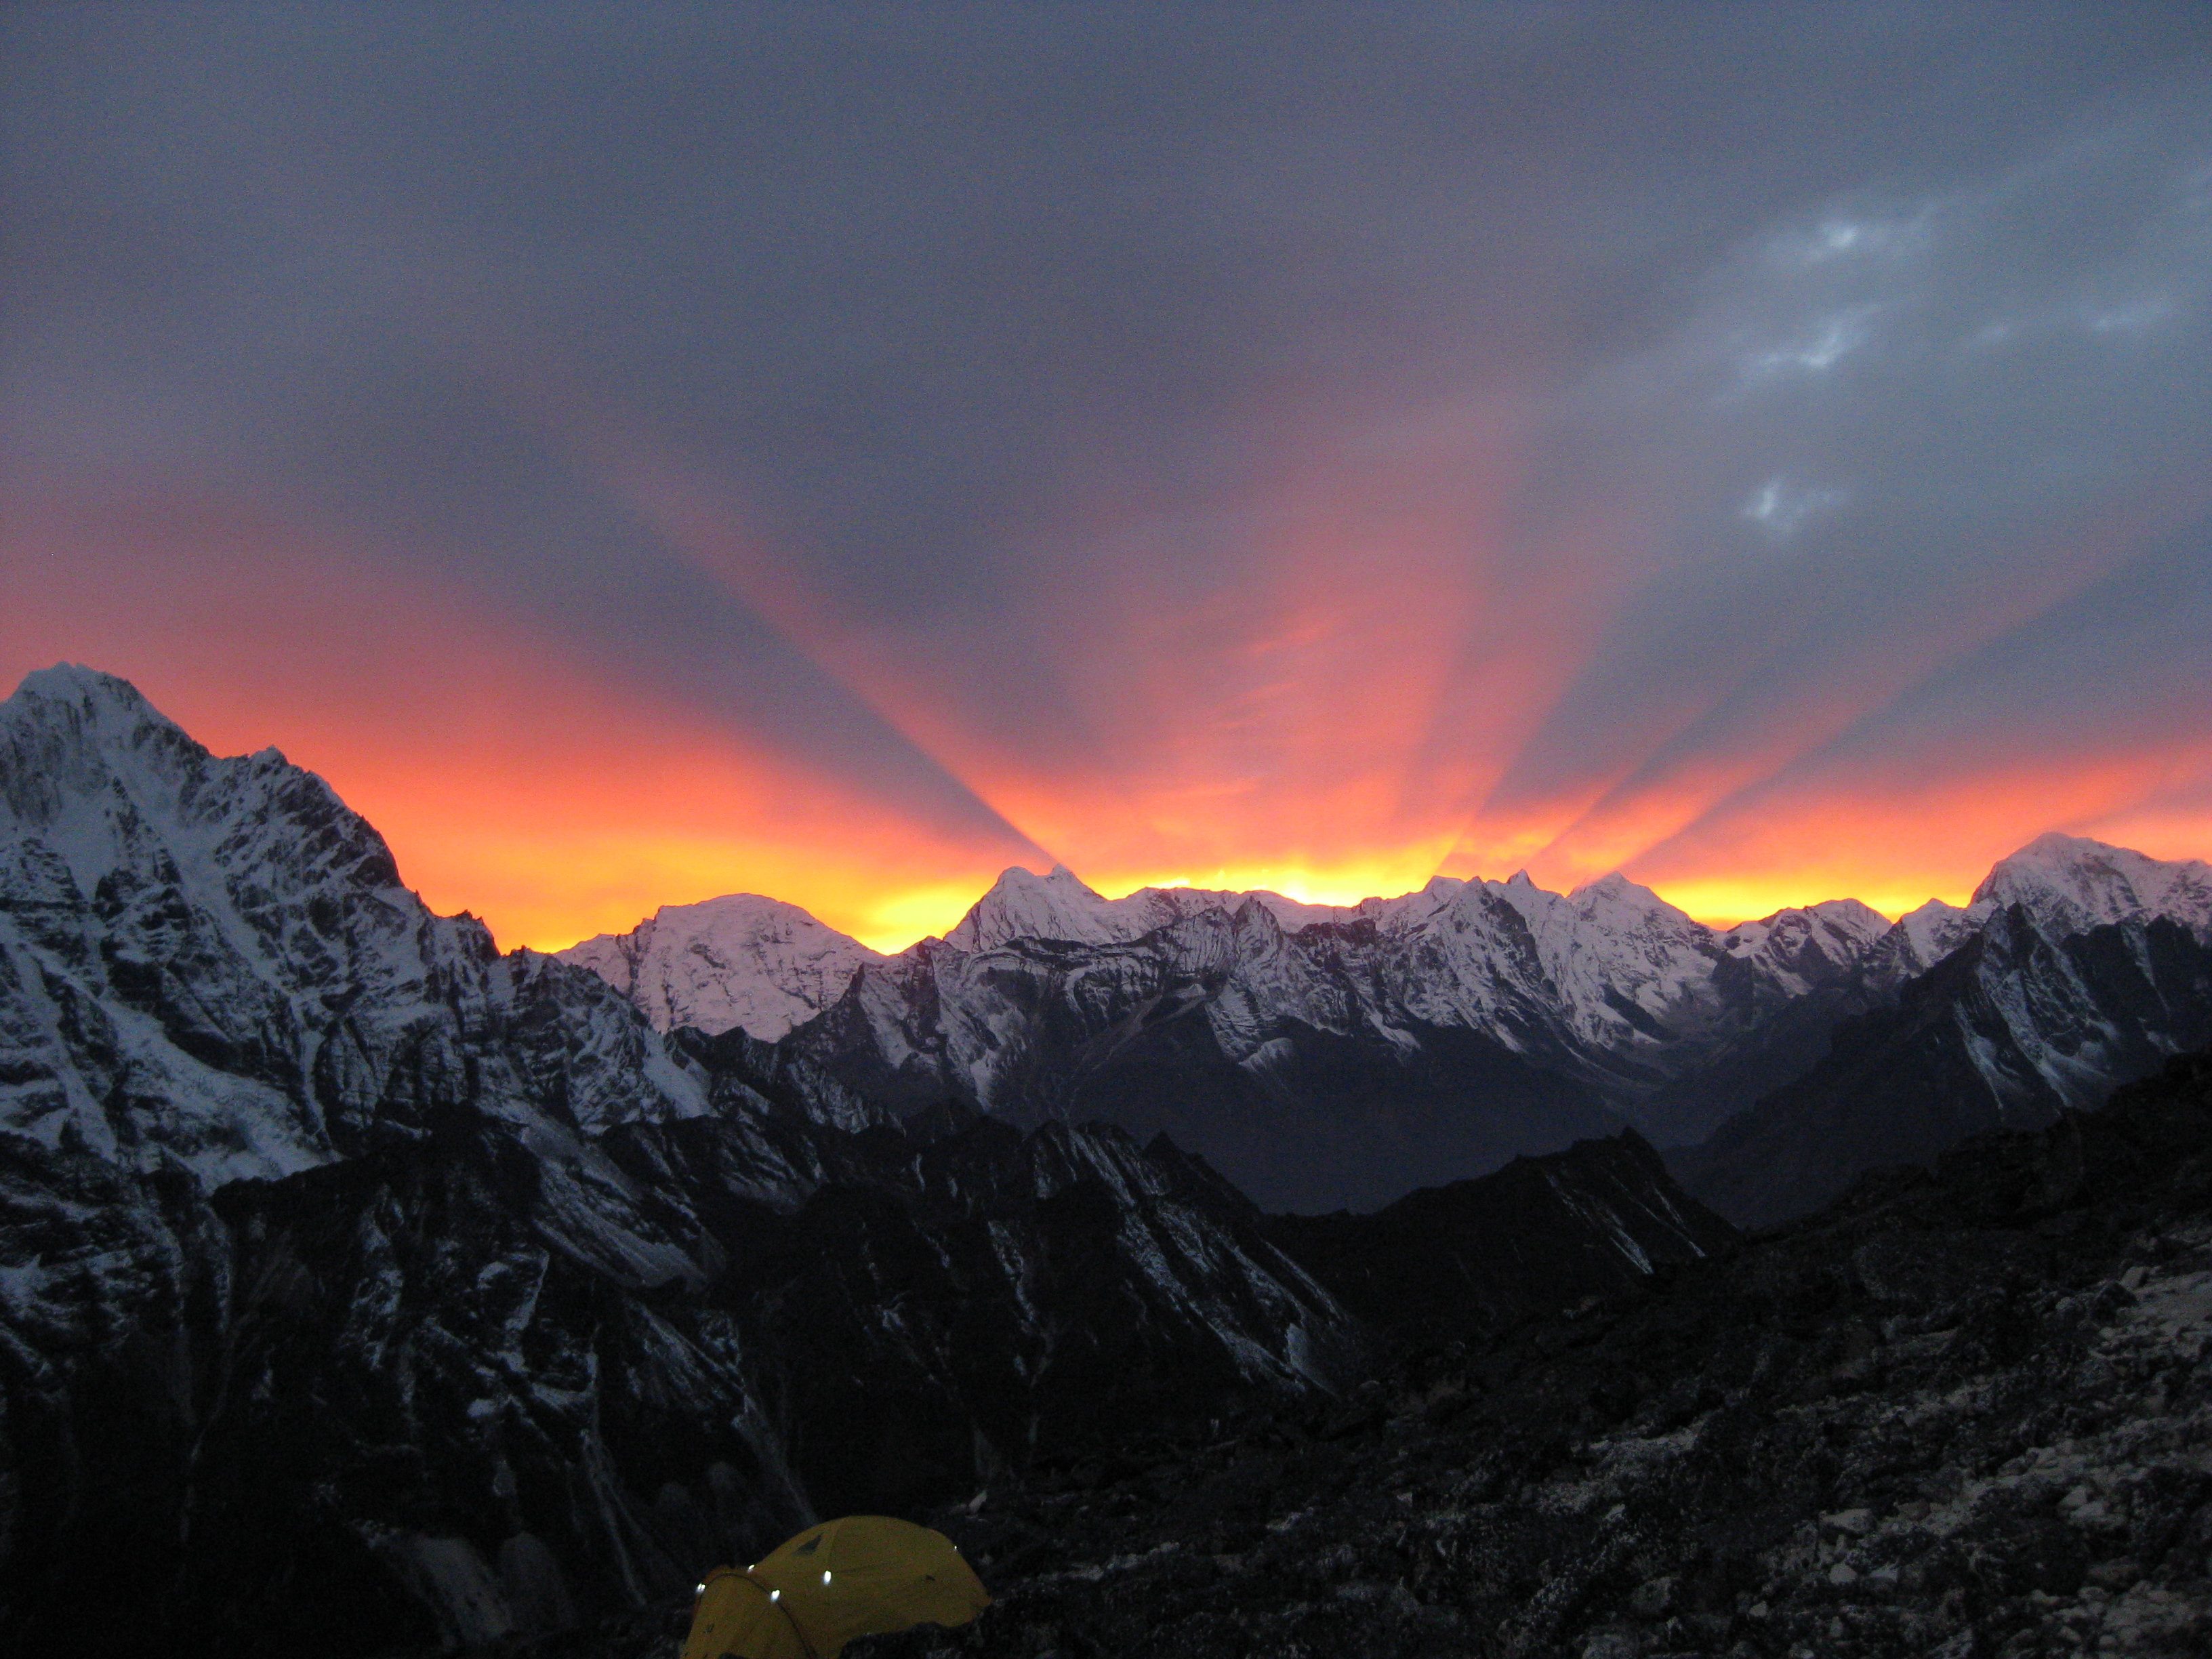 Sunset from 20,000 feet on Mount Ama Dablam, Nepal - photo by Suzanne Imber (taken from ImagGeo)